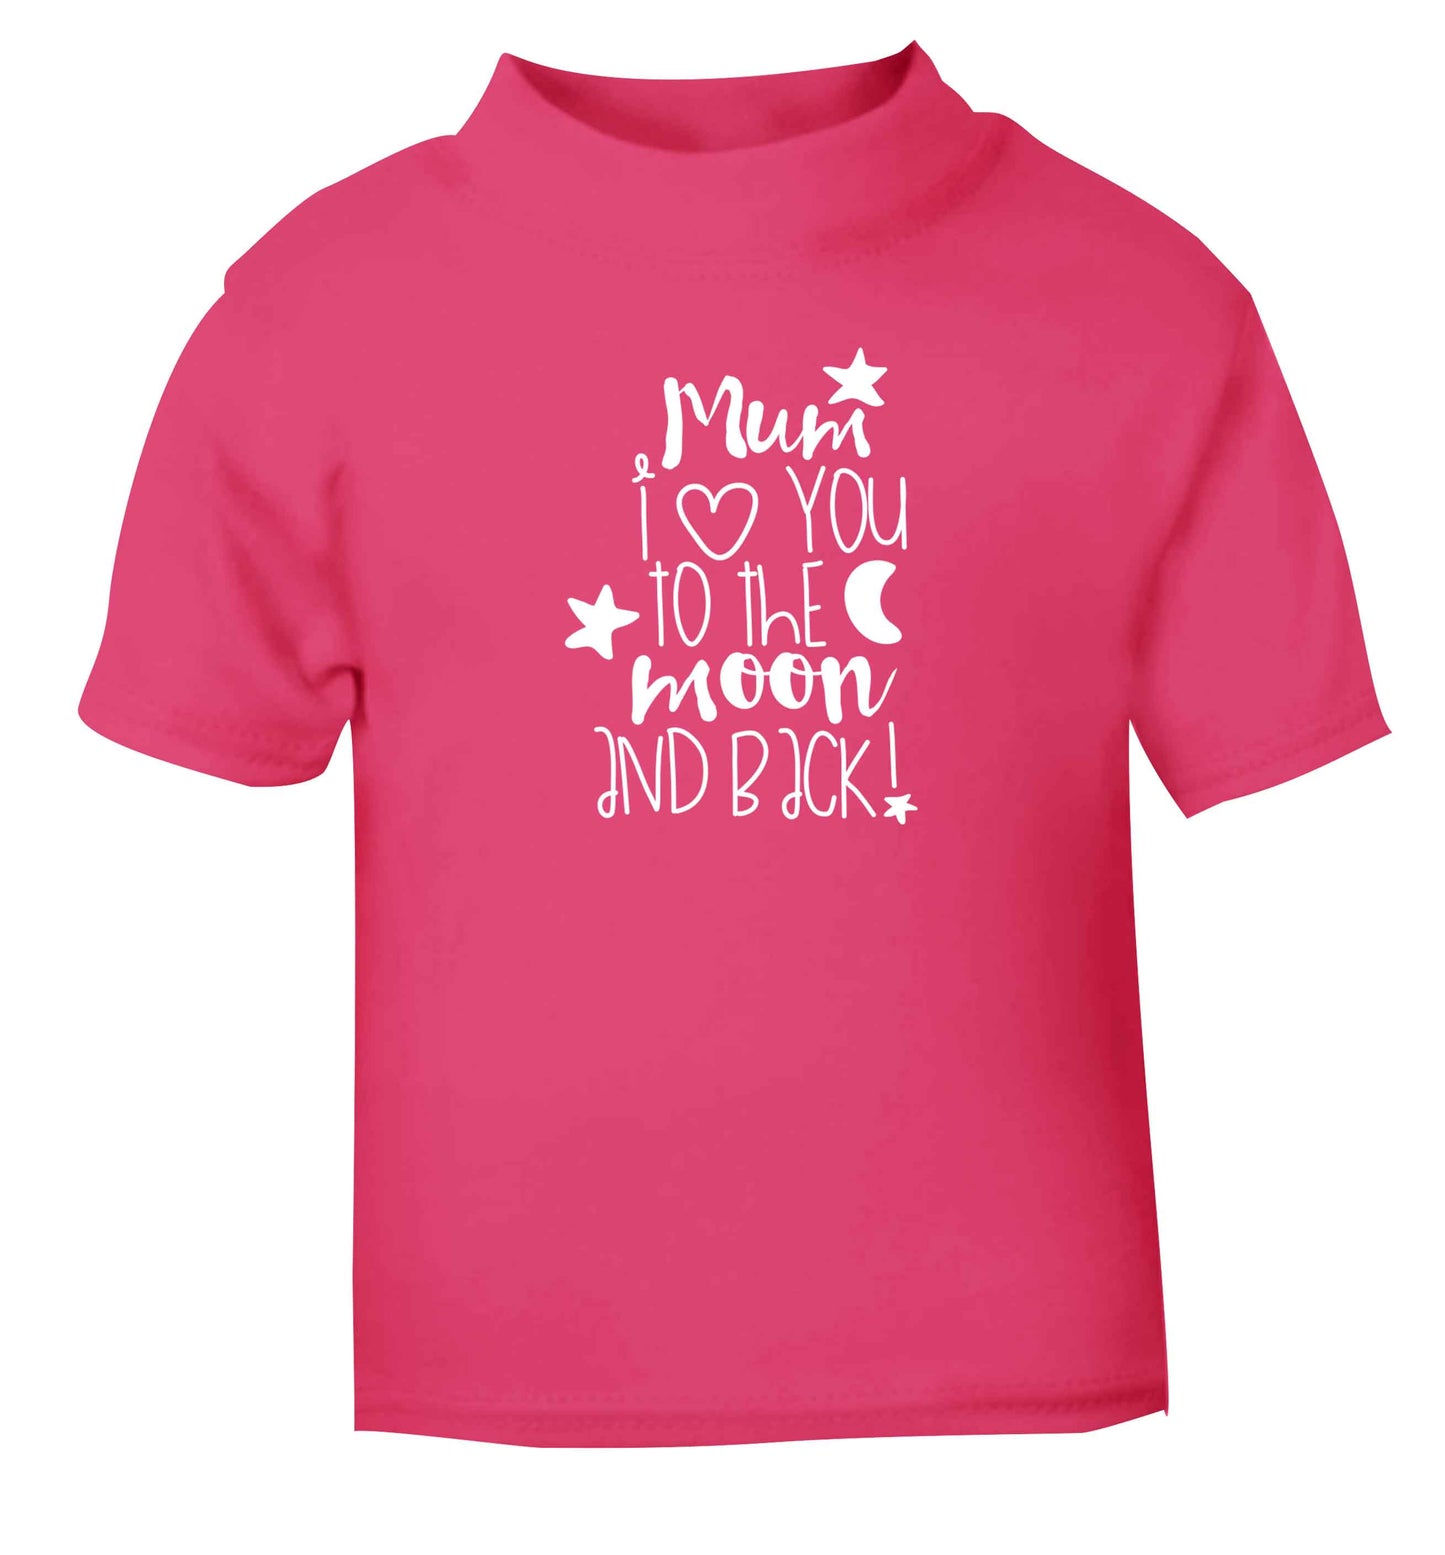 Mum I love you to the moon and back pink baby toddler Tshirt 2 Years